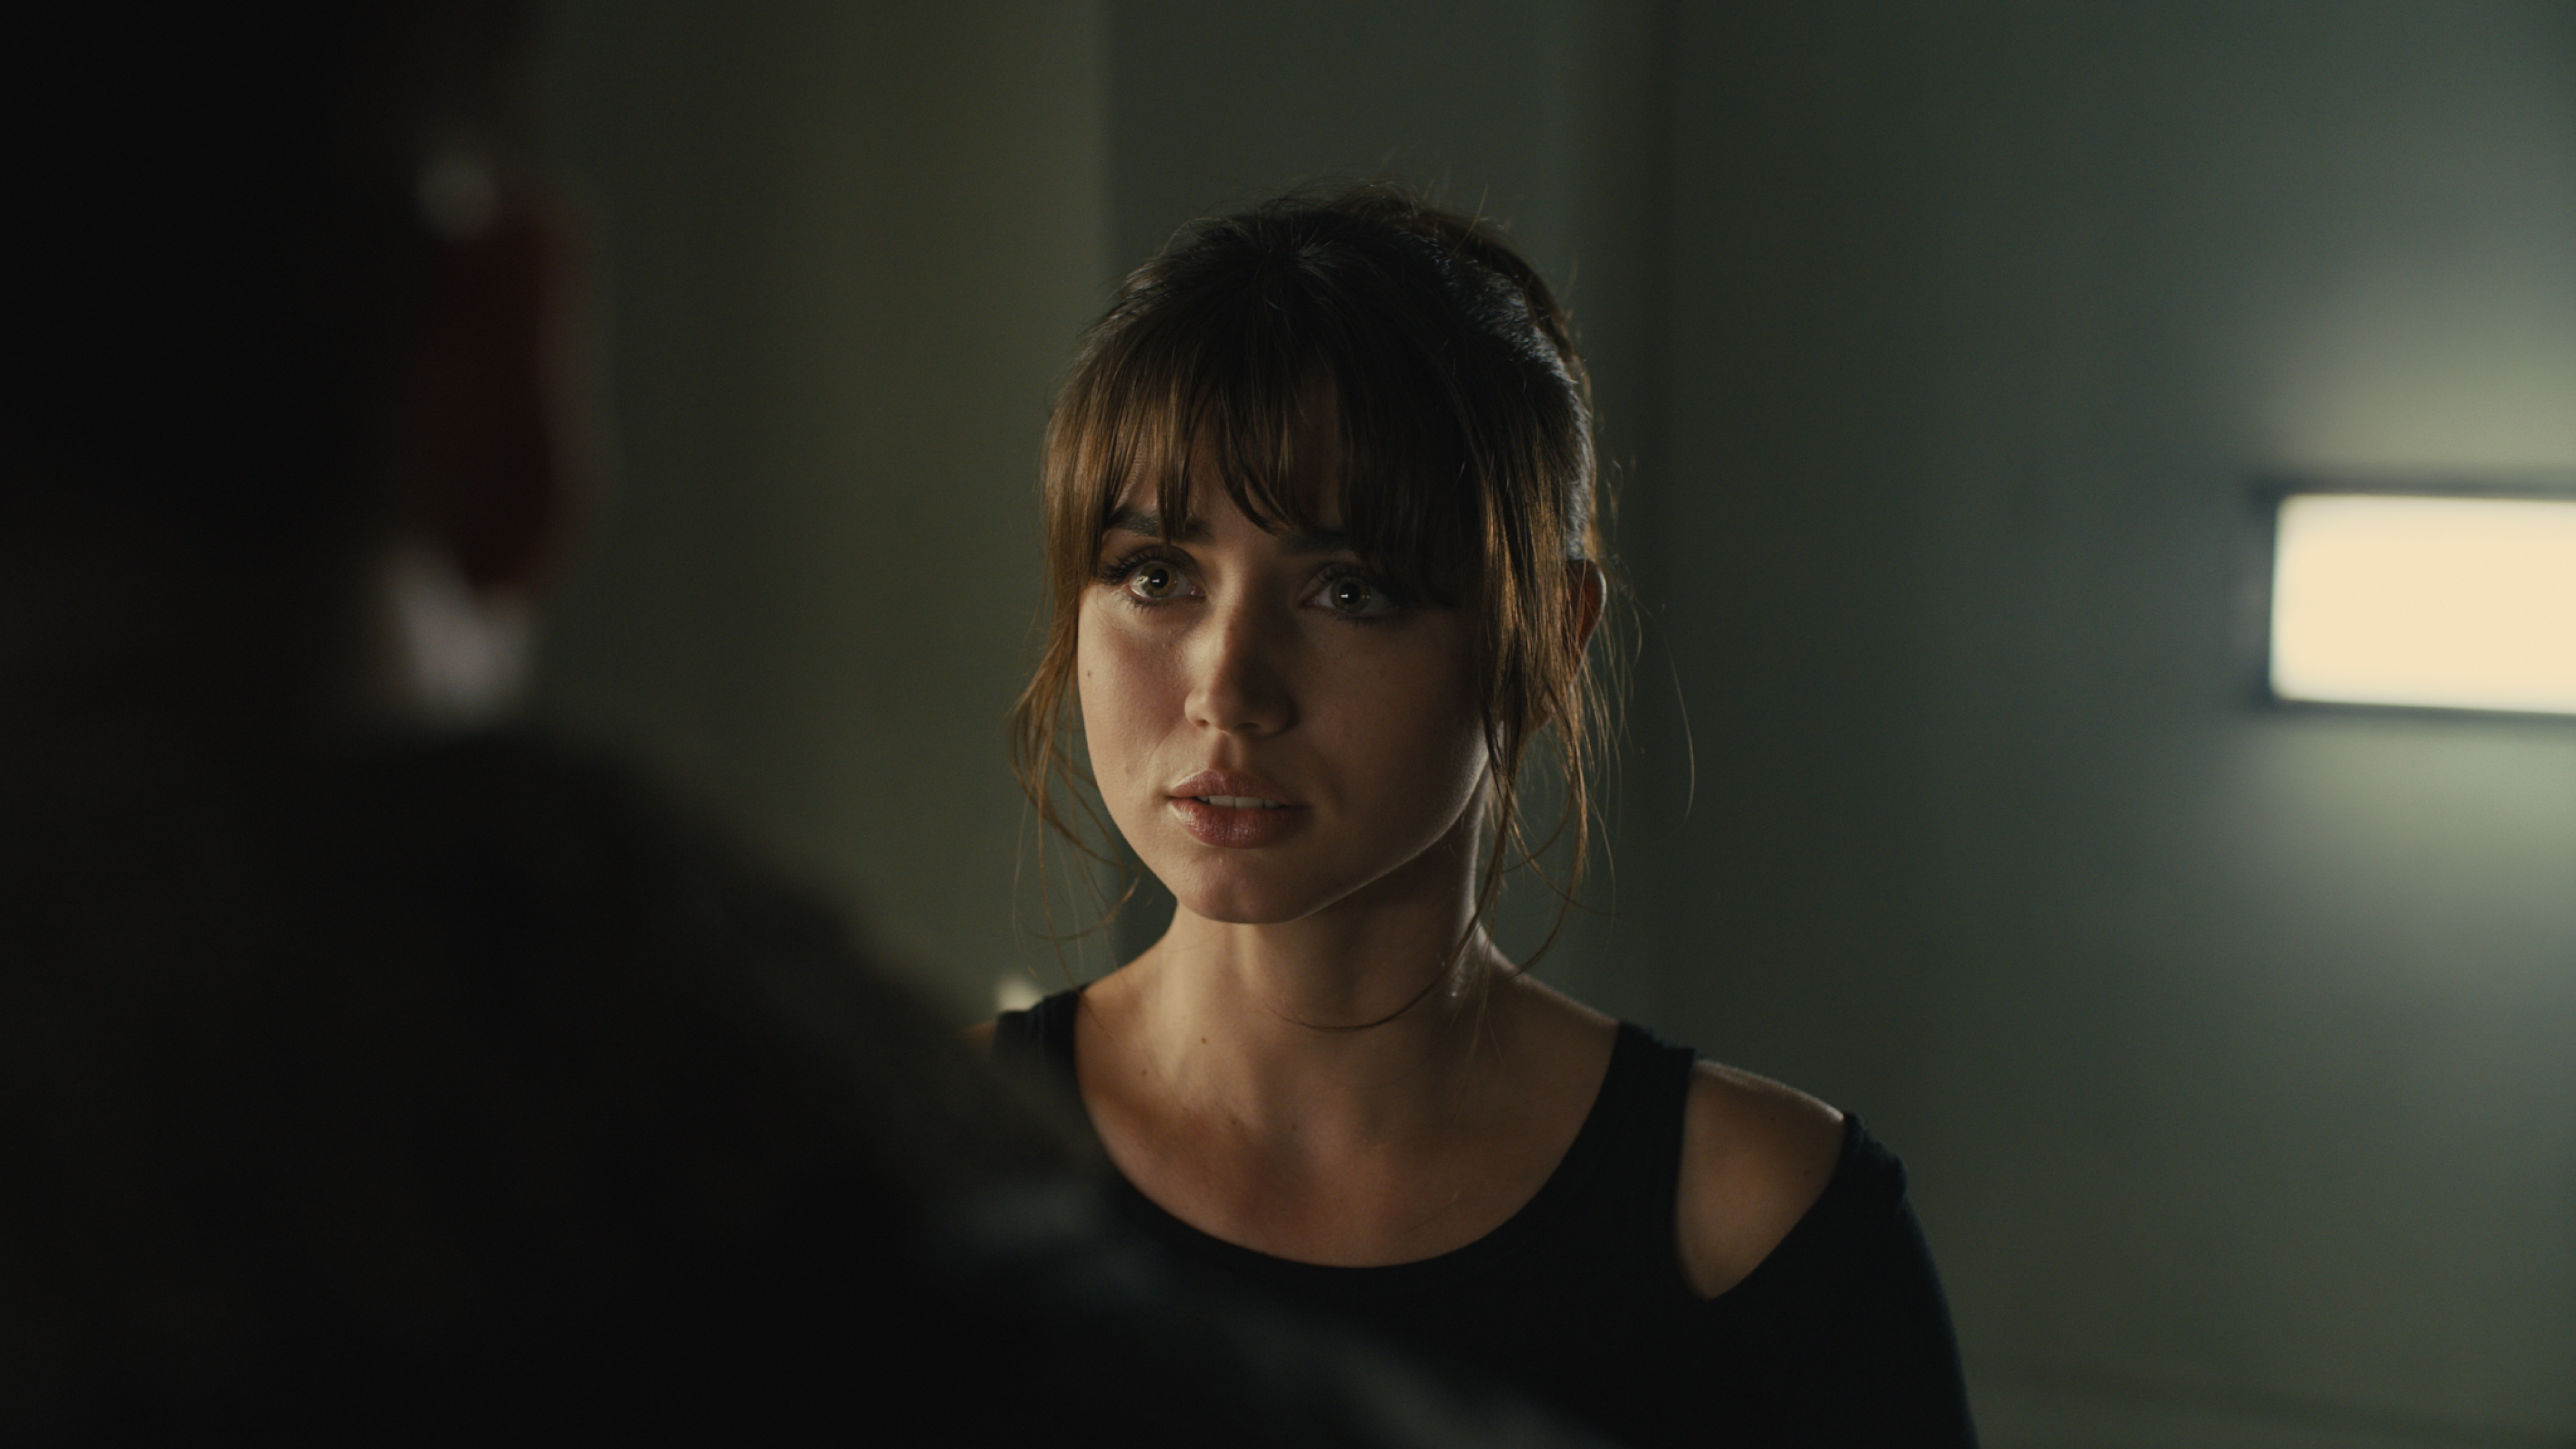 3840x2160 Ana De Armas In Blade Runner 49 Movie 4k Wallpaper Hd Movies 4k Wallpapers Images Photos And Background